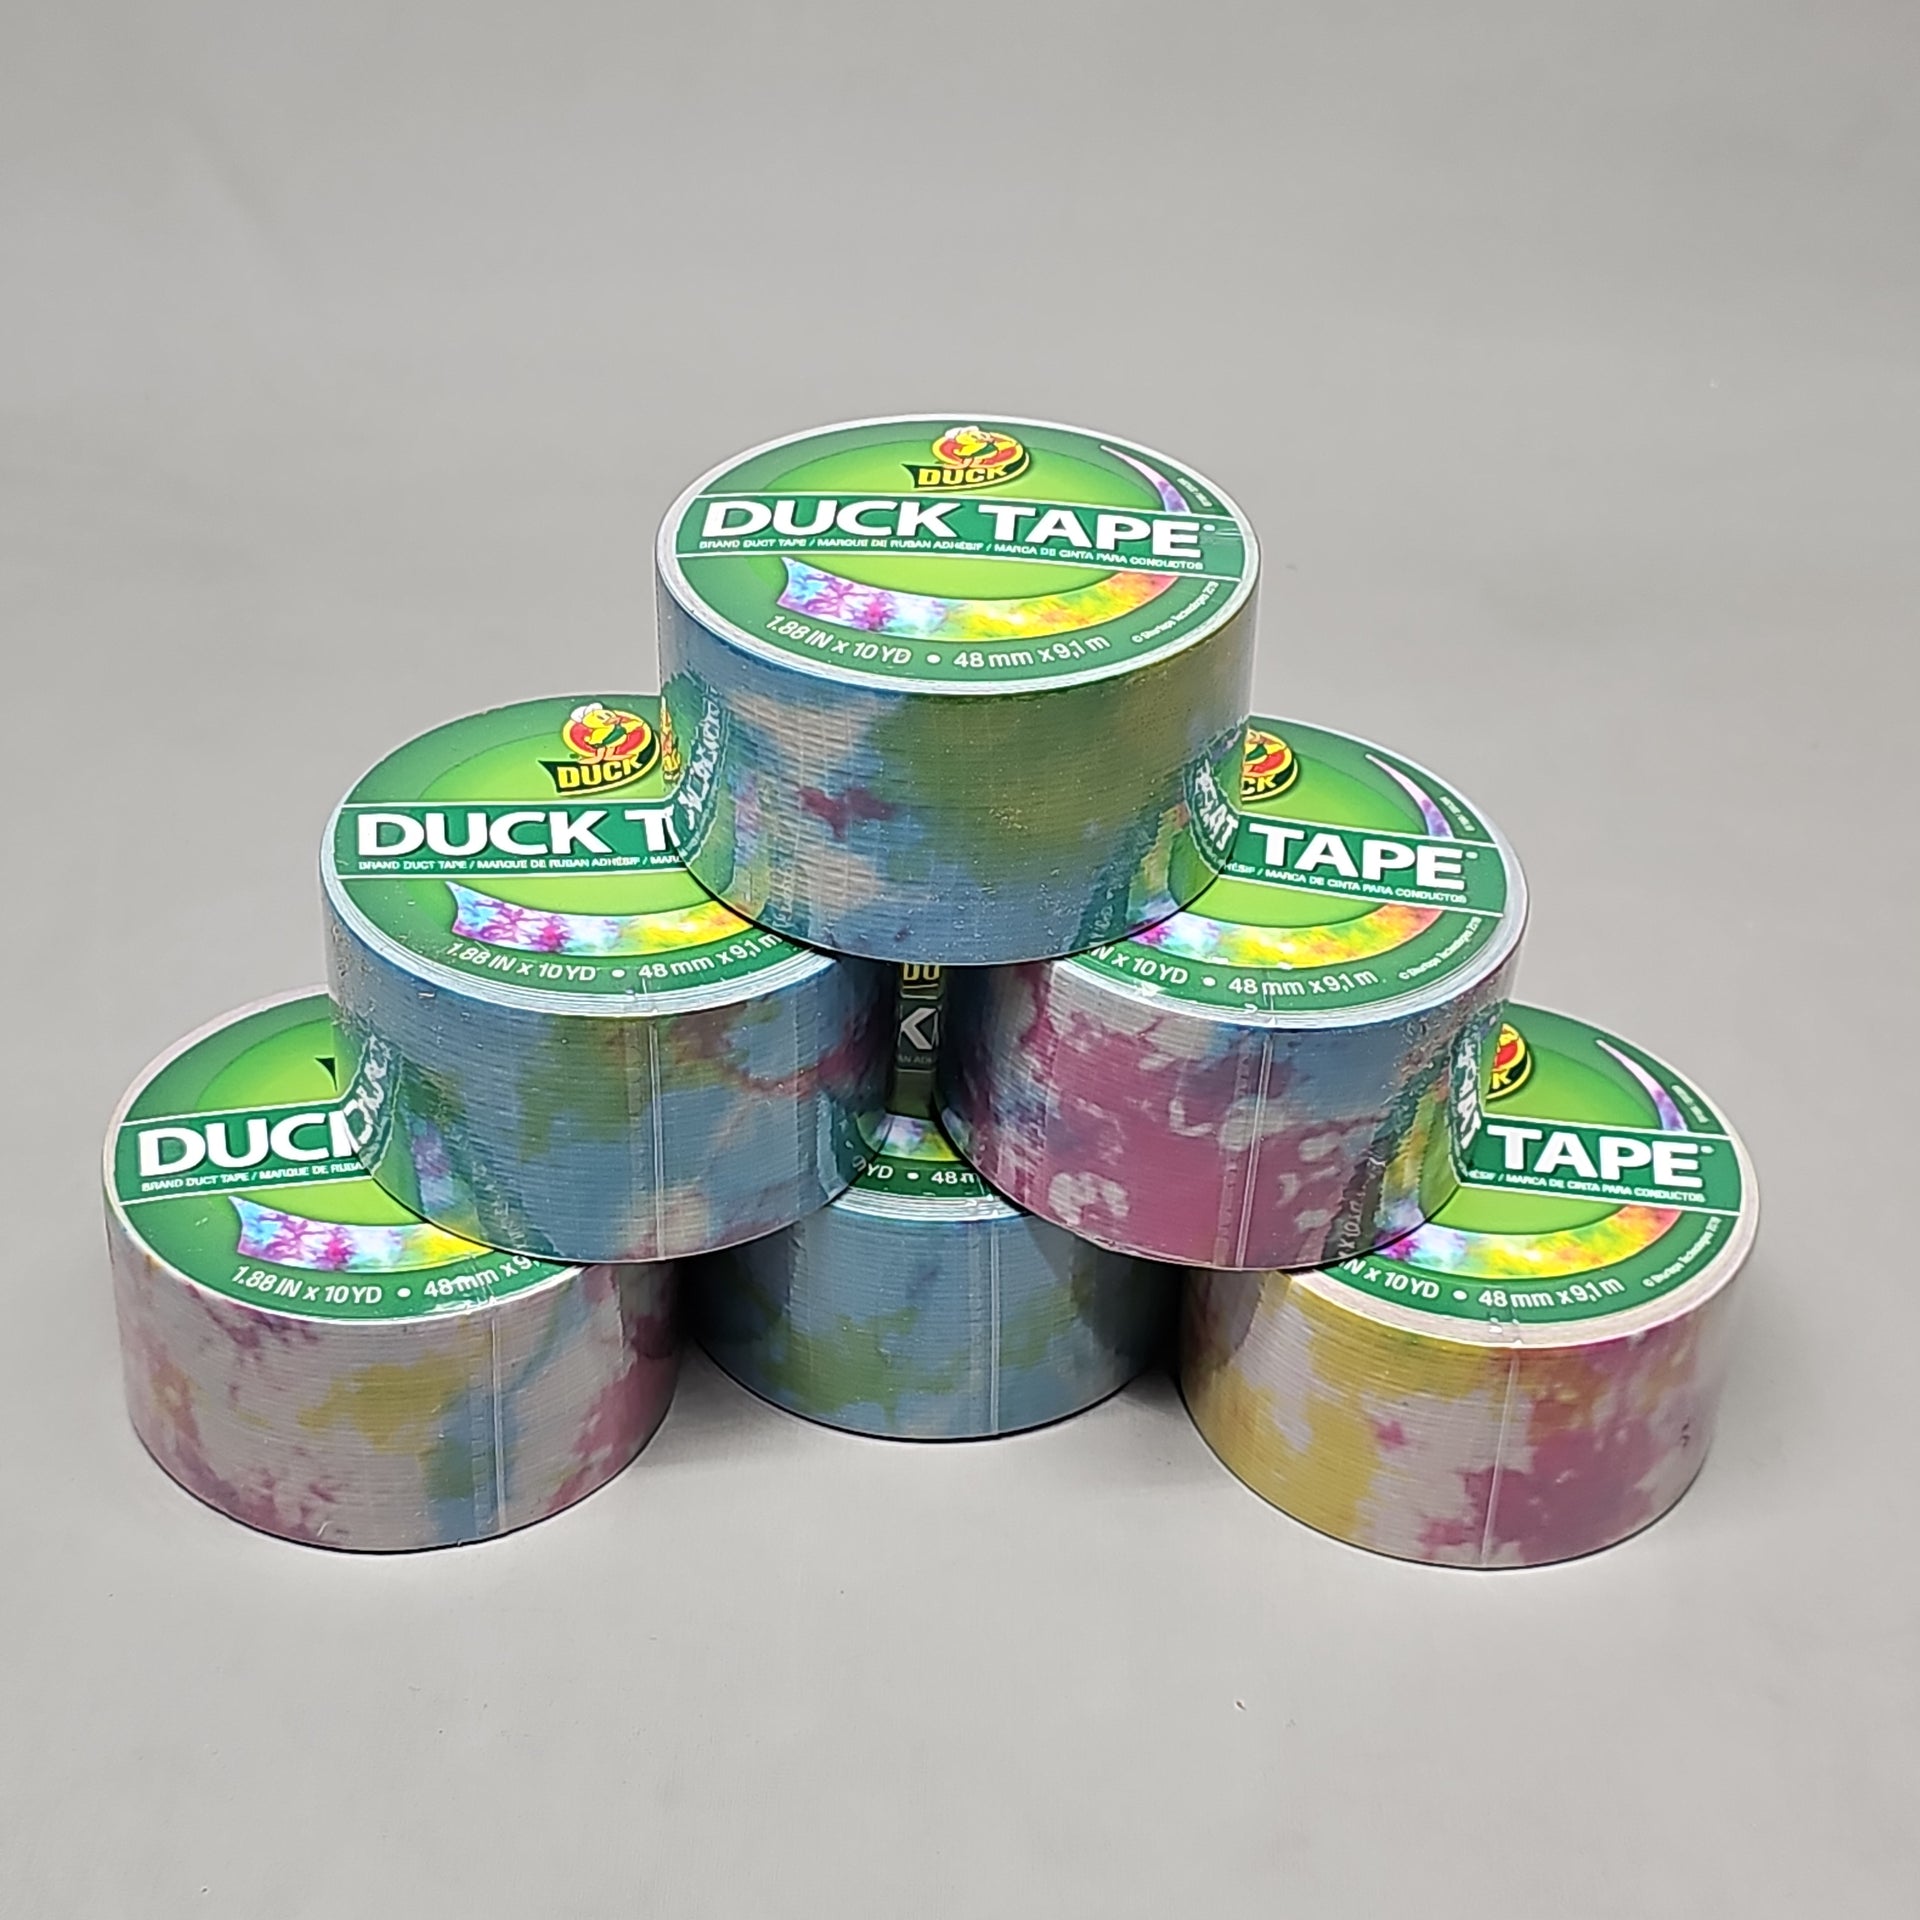 SHURTAPE DUCK TAPE 6 Rolls of Pink Duct Tape 1.88 X 20 YD 283876 – PayWut